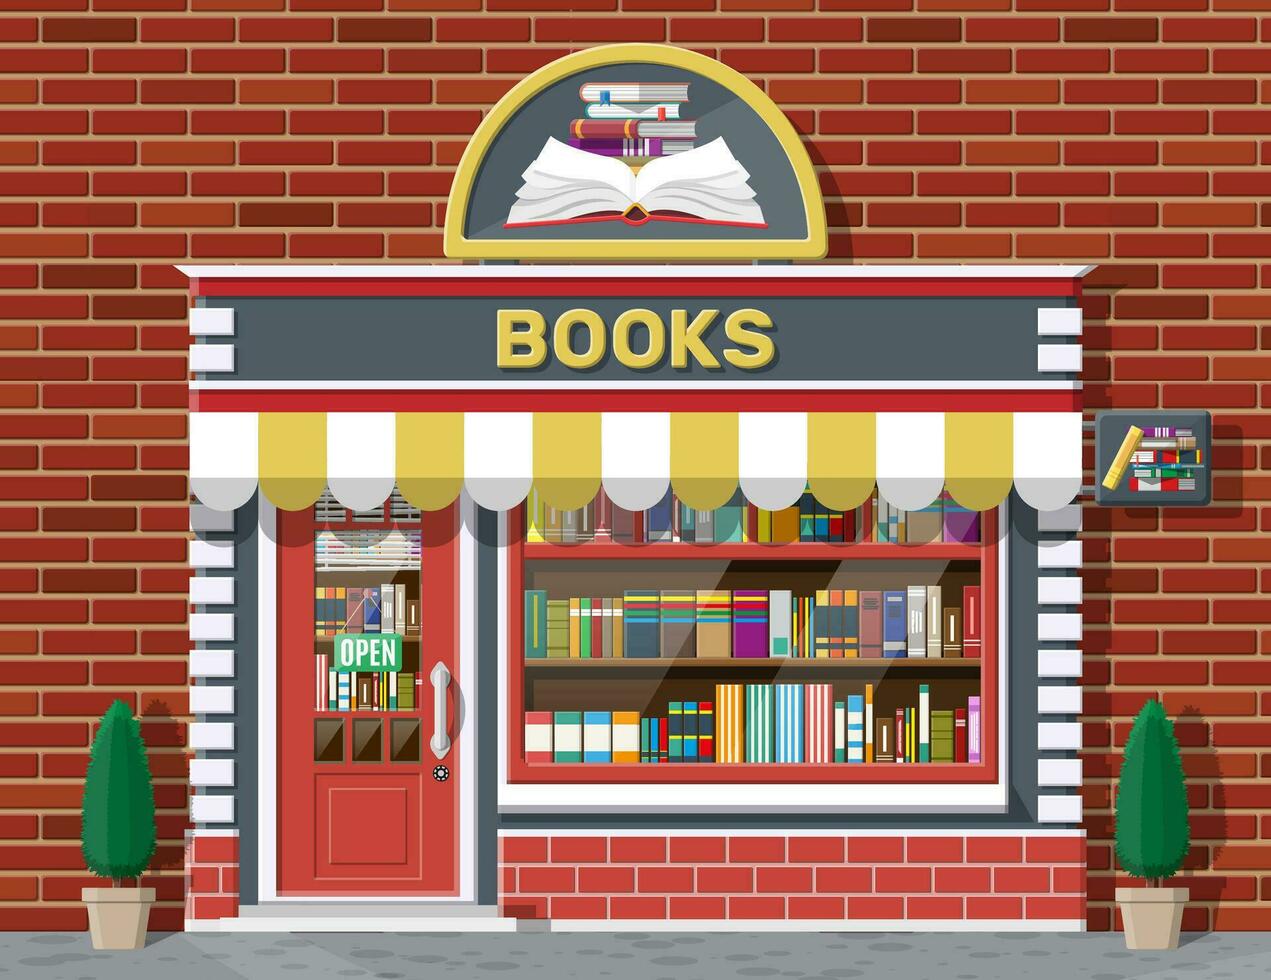 Bookstore shop exterior. Books shop brick building. Education or library market. Books in shop window on shelves. Street shop, mall, market, boutique facade. Vector flat style illustration.